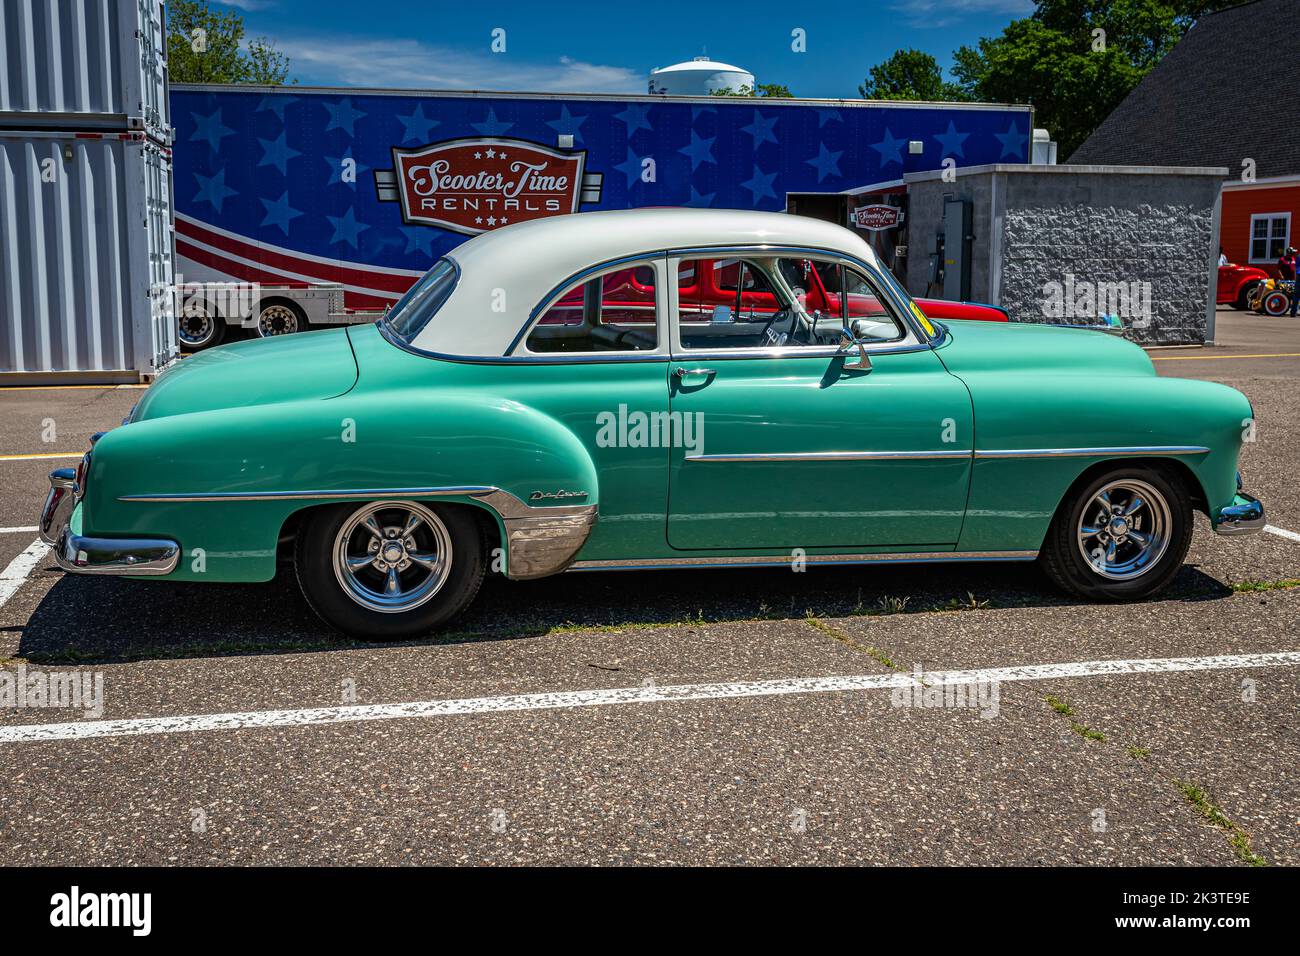 Falcon Heights, MN - June 18, 2022: High perspective side view of a 1952 Chevrolet Styleline Deluxe 2 Door Sedan at a local car show. Stock Photo